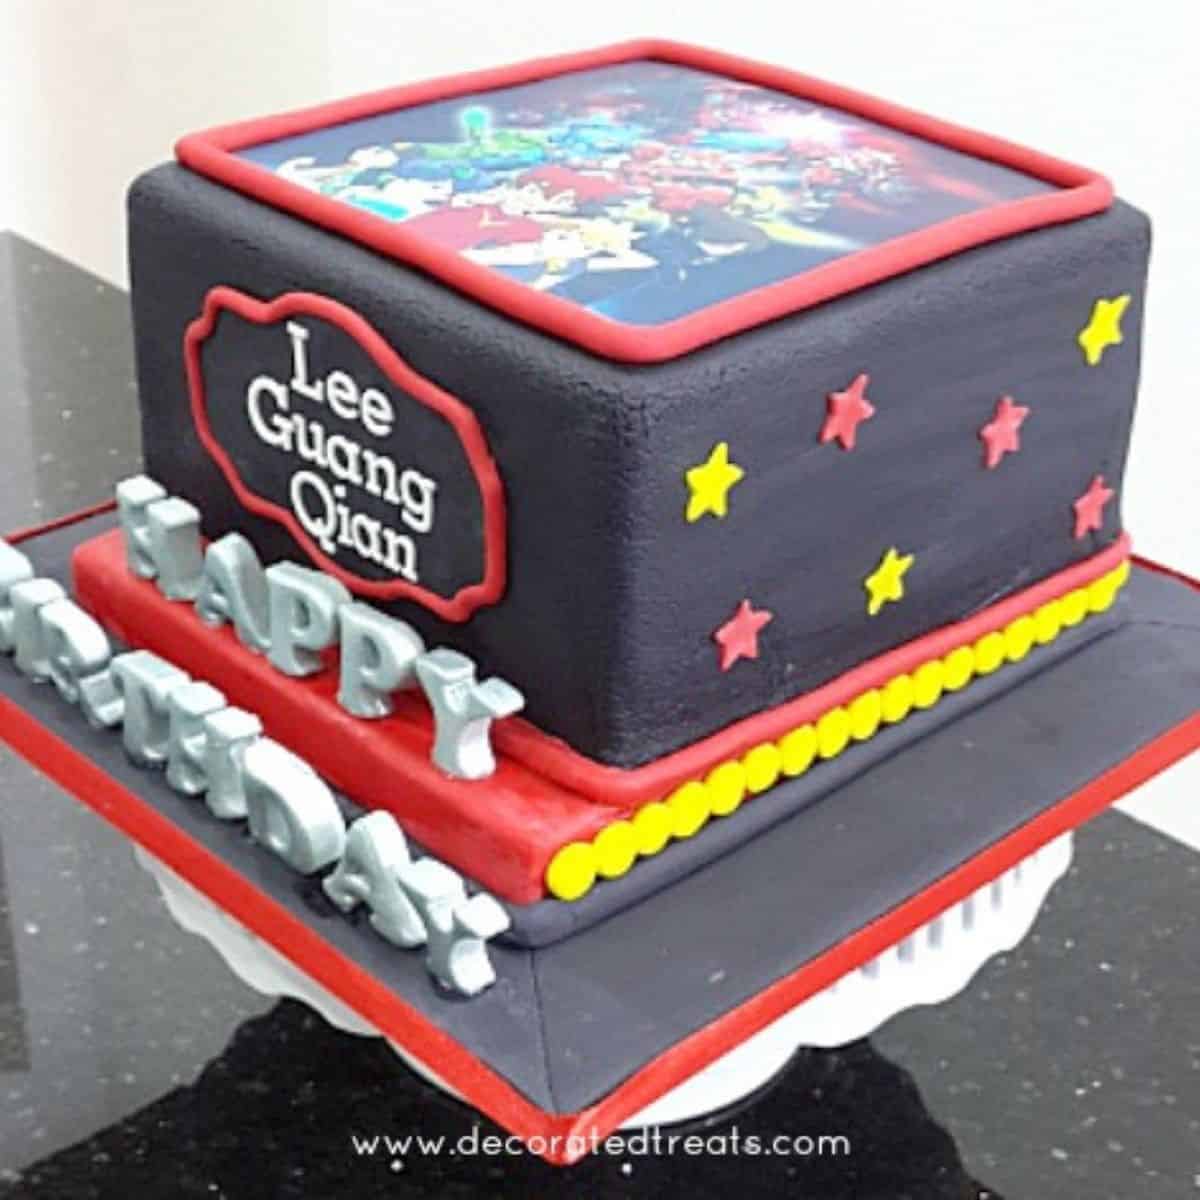 A black square cake with the Tenkai Knights edible image on top. Cake is decorated with red and yellow stars and the Happy Birthday alphabets in silver 3D